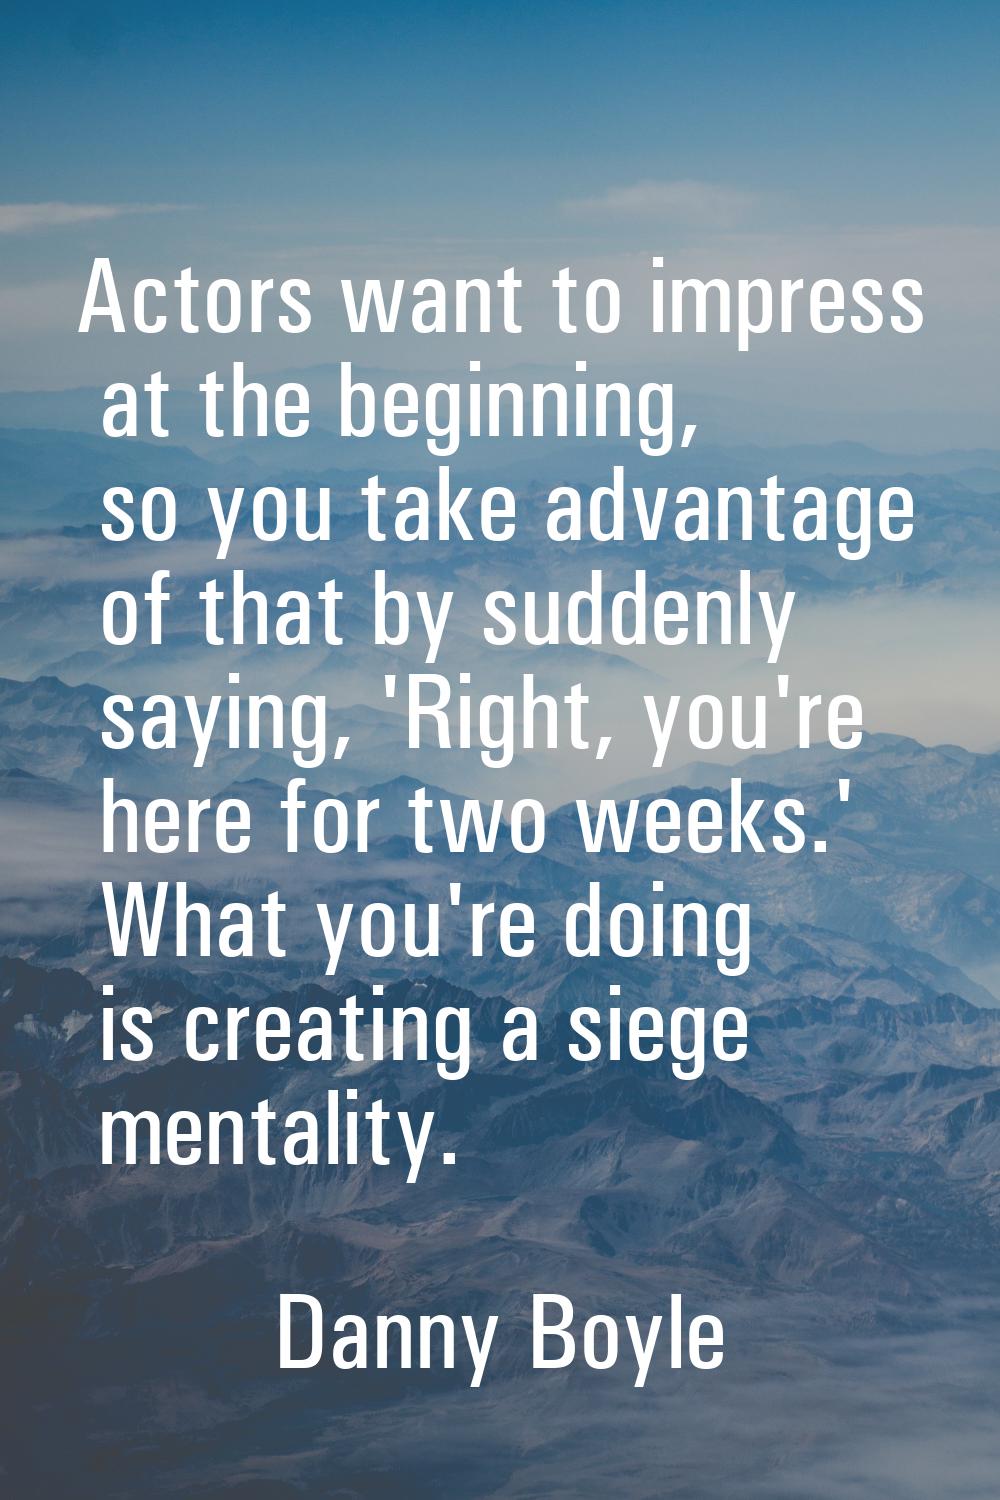 Actors want to impress at the beginning, so you take advantage of that by suddenly saying, 'Right, 